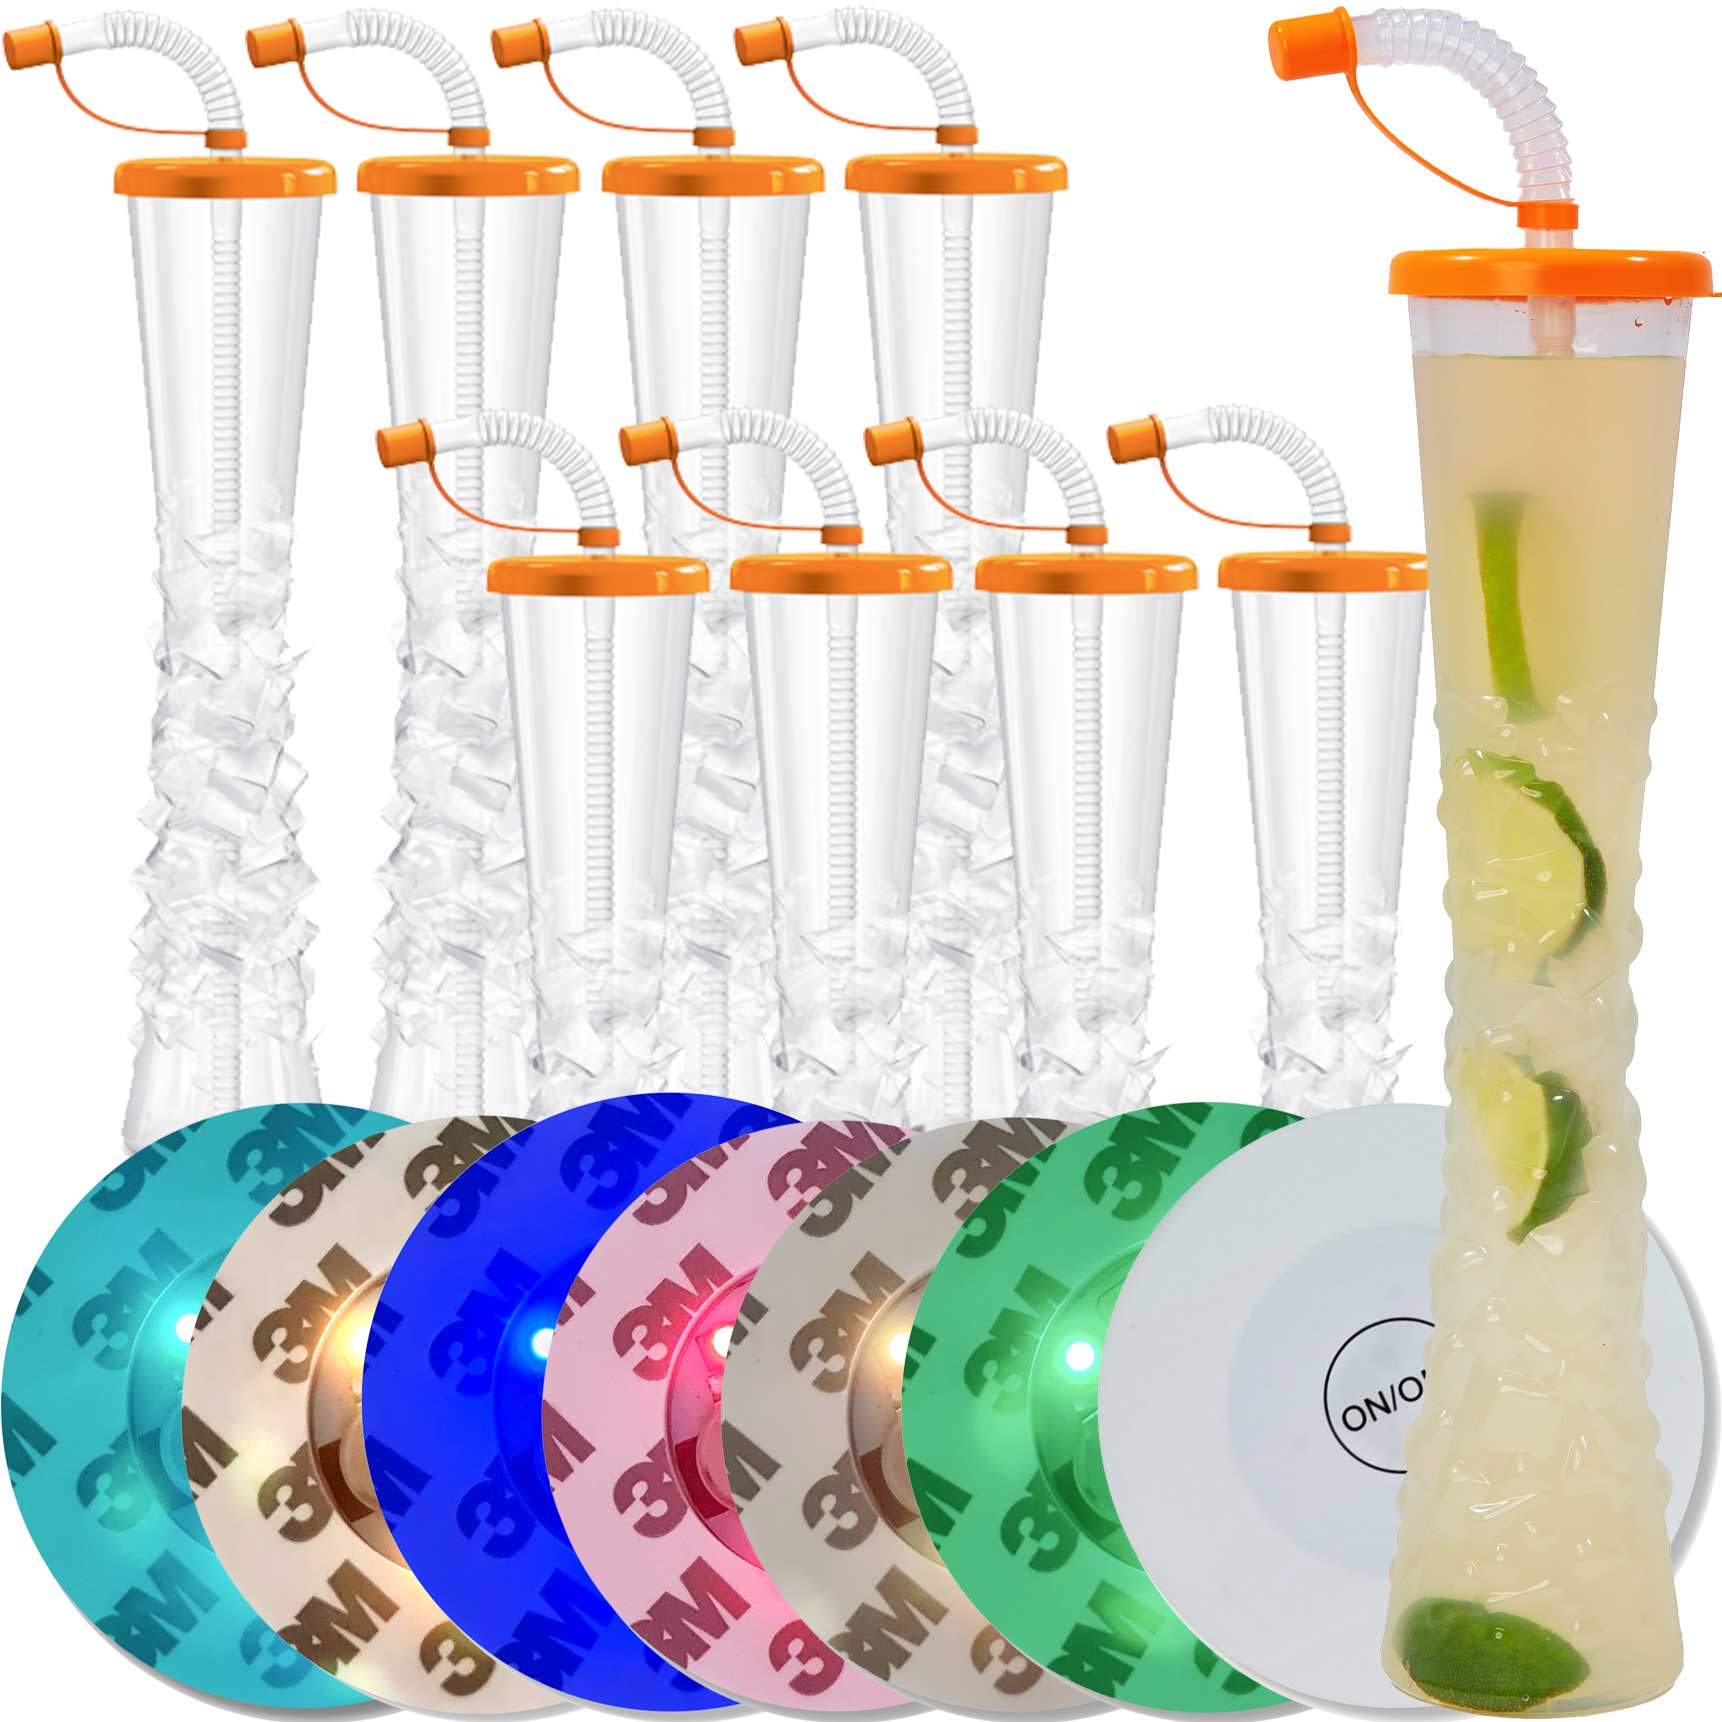 Sweet World USA Yard Cups Ice Yard Cups with LED Coasters (54 Cups - Orange) - for Frozen Drinks, Kids Parties - 17oz. (500ml) cups with lids and straws